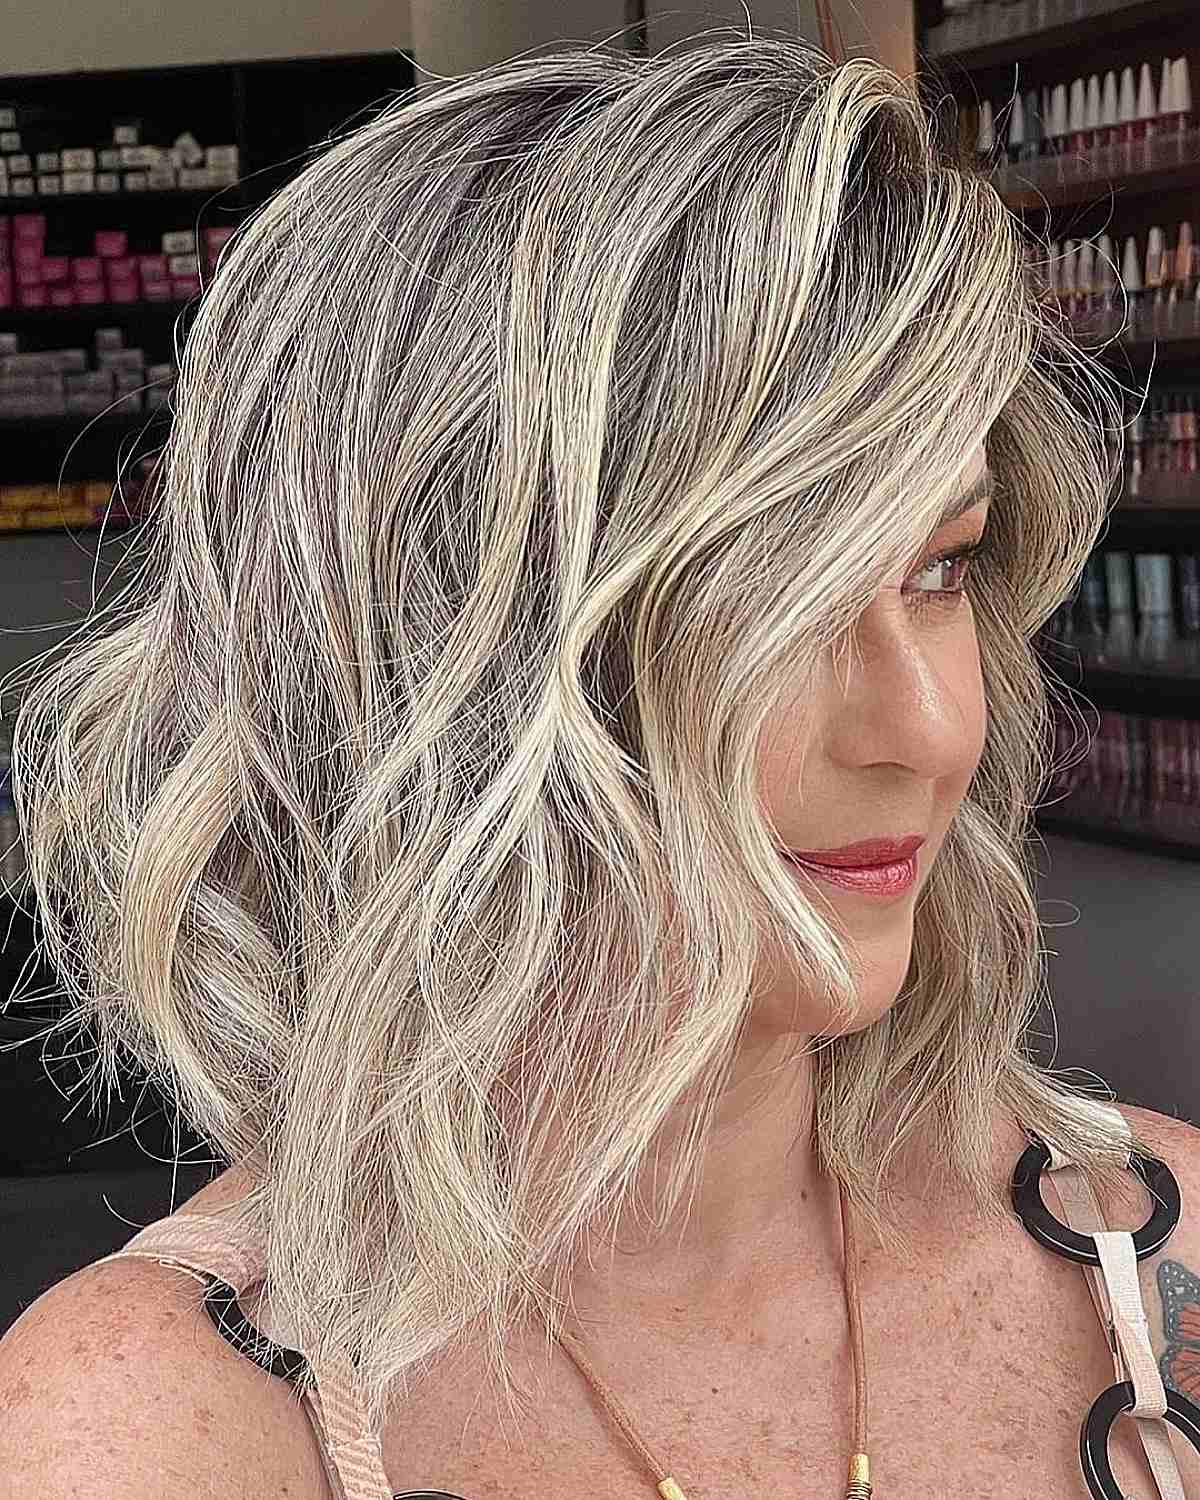 Cool Mid-Length Hair in Textured Wavy Lob Style